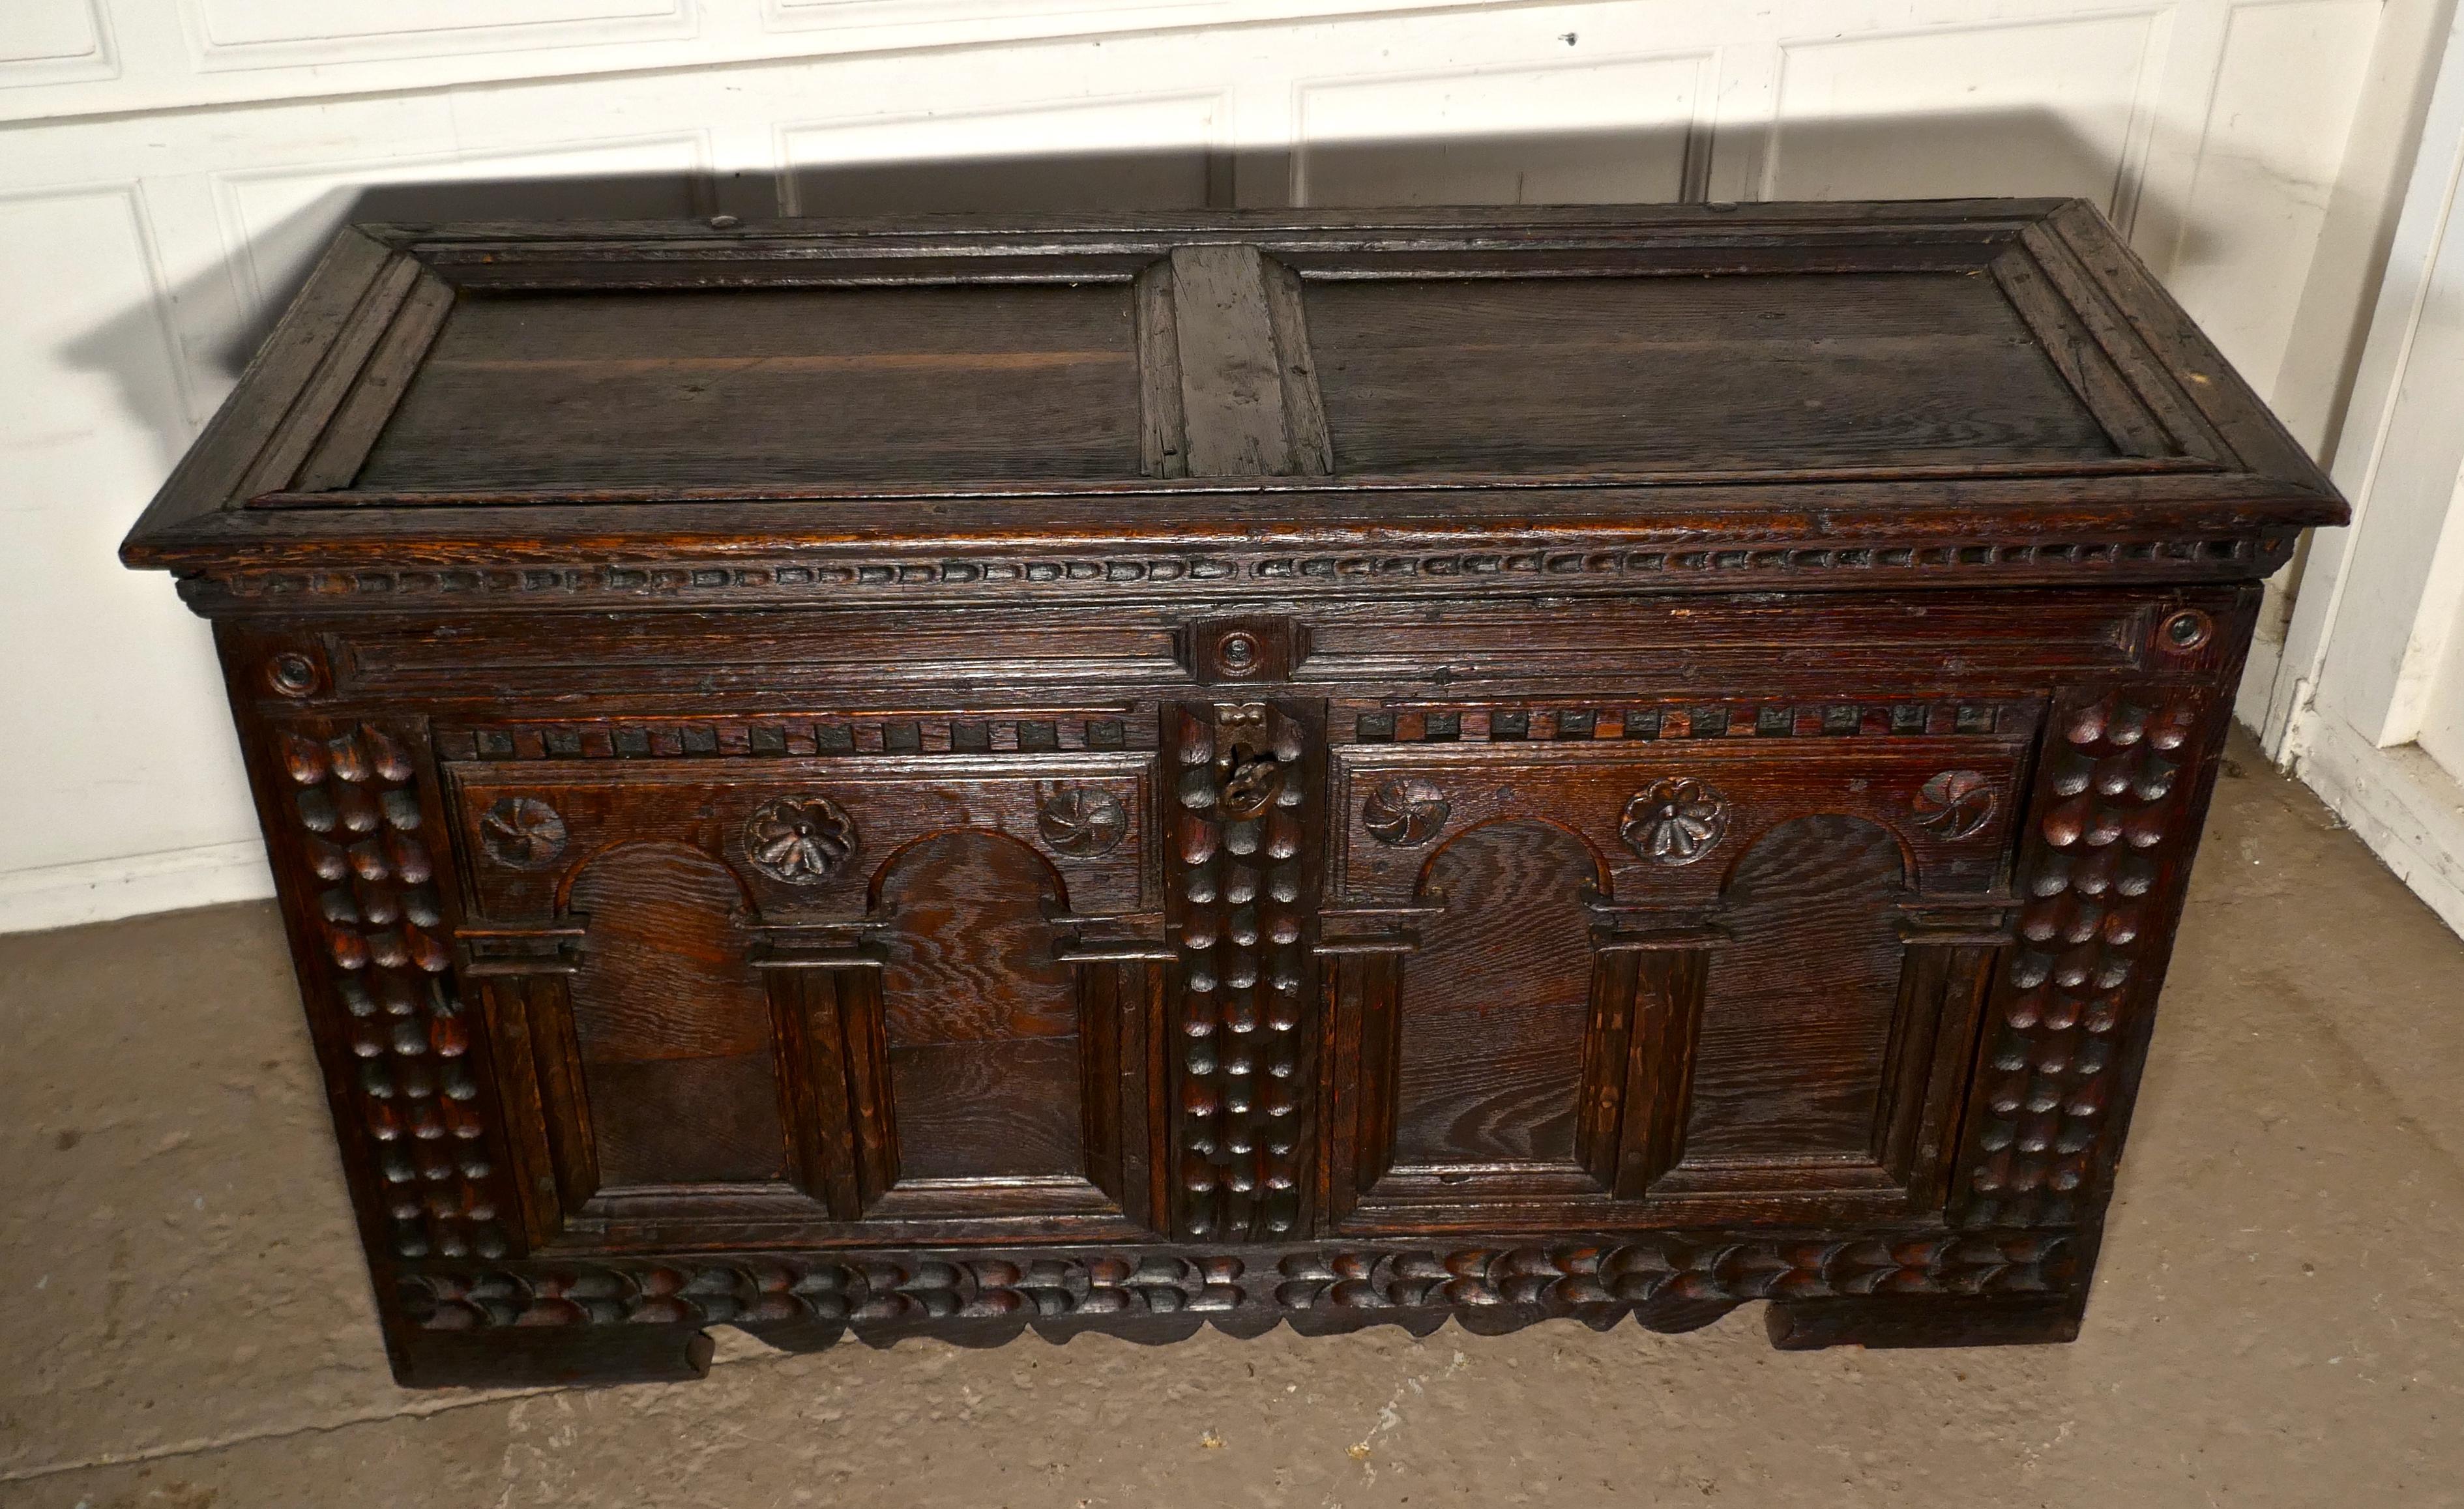 Large 18th century carved oak cassone, marriage chest or carved coffer

This is a lovely old piece, and is in remarkably good condition for its age, the coffer comes from either Spain or the South of France
The cassone has carved arched panels